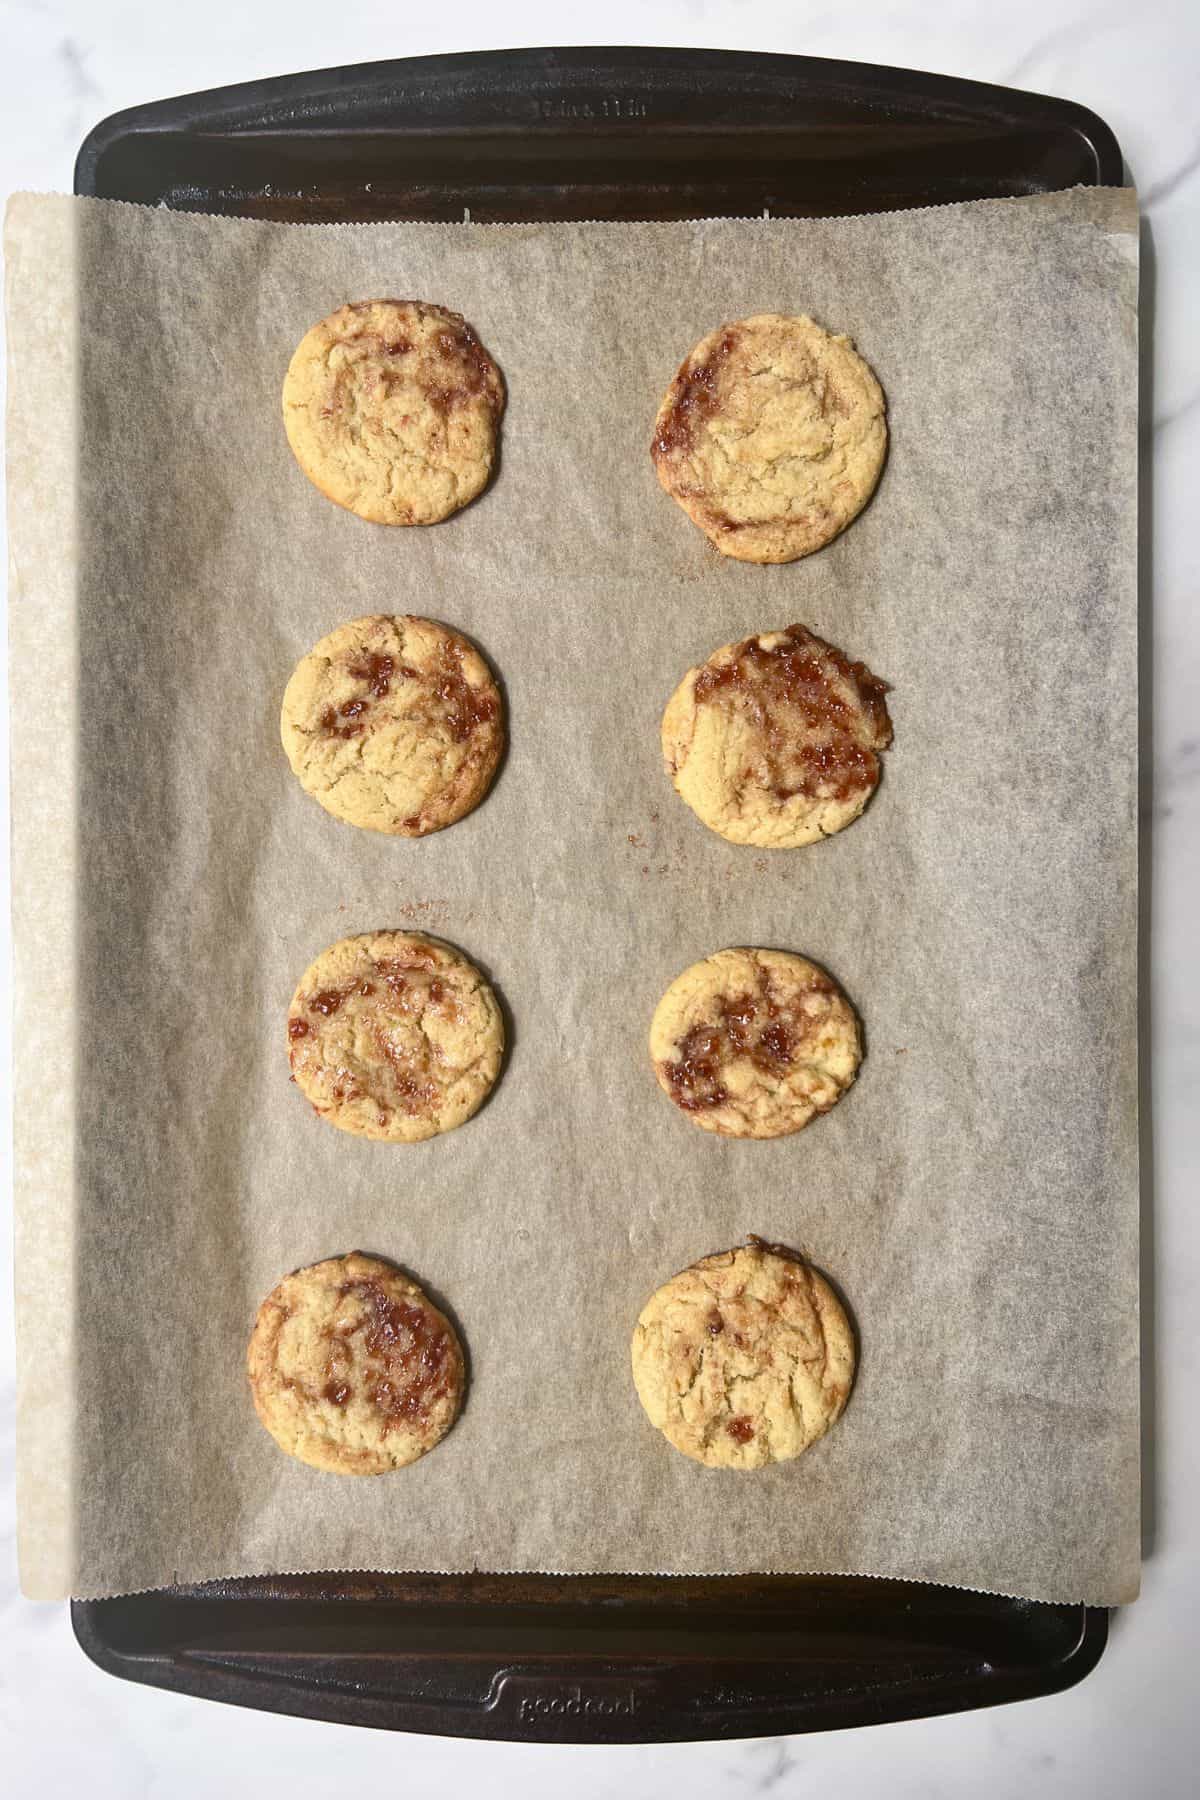 Strawberry Jam Cookies baked and cooling on a baking sheet.